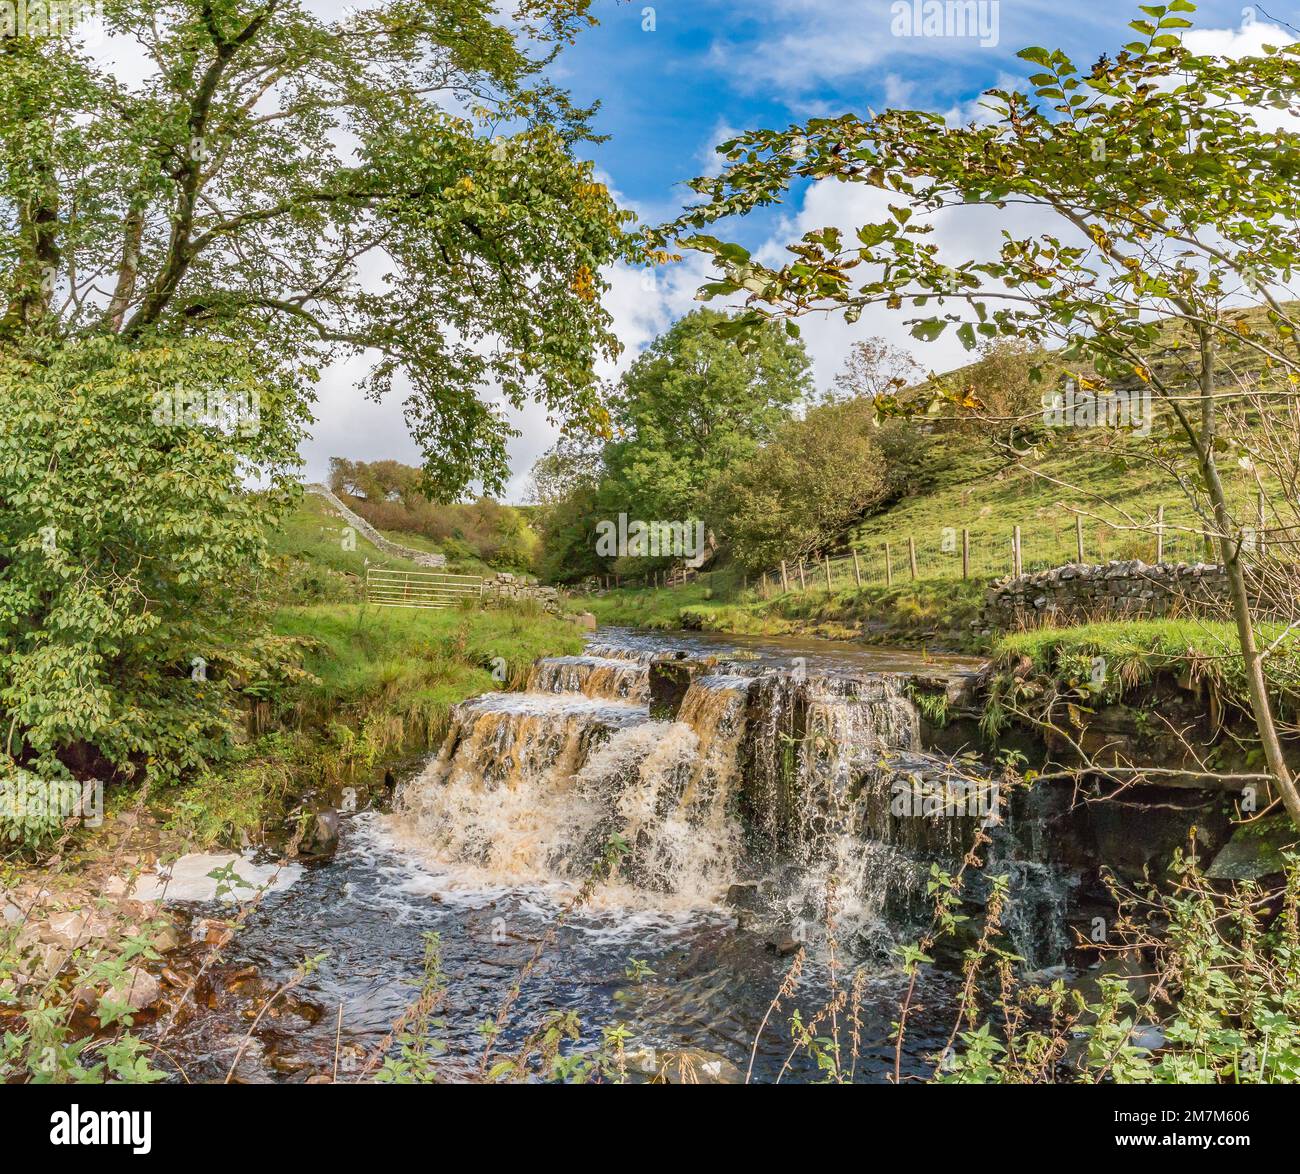 Autumn tints forming in the trees surrounding this picturesque waterfall on Ettersgill Beck in Upper Teesdale. Stock Photo